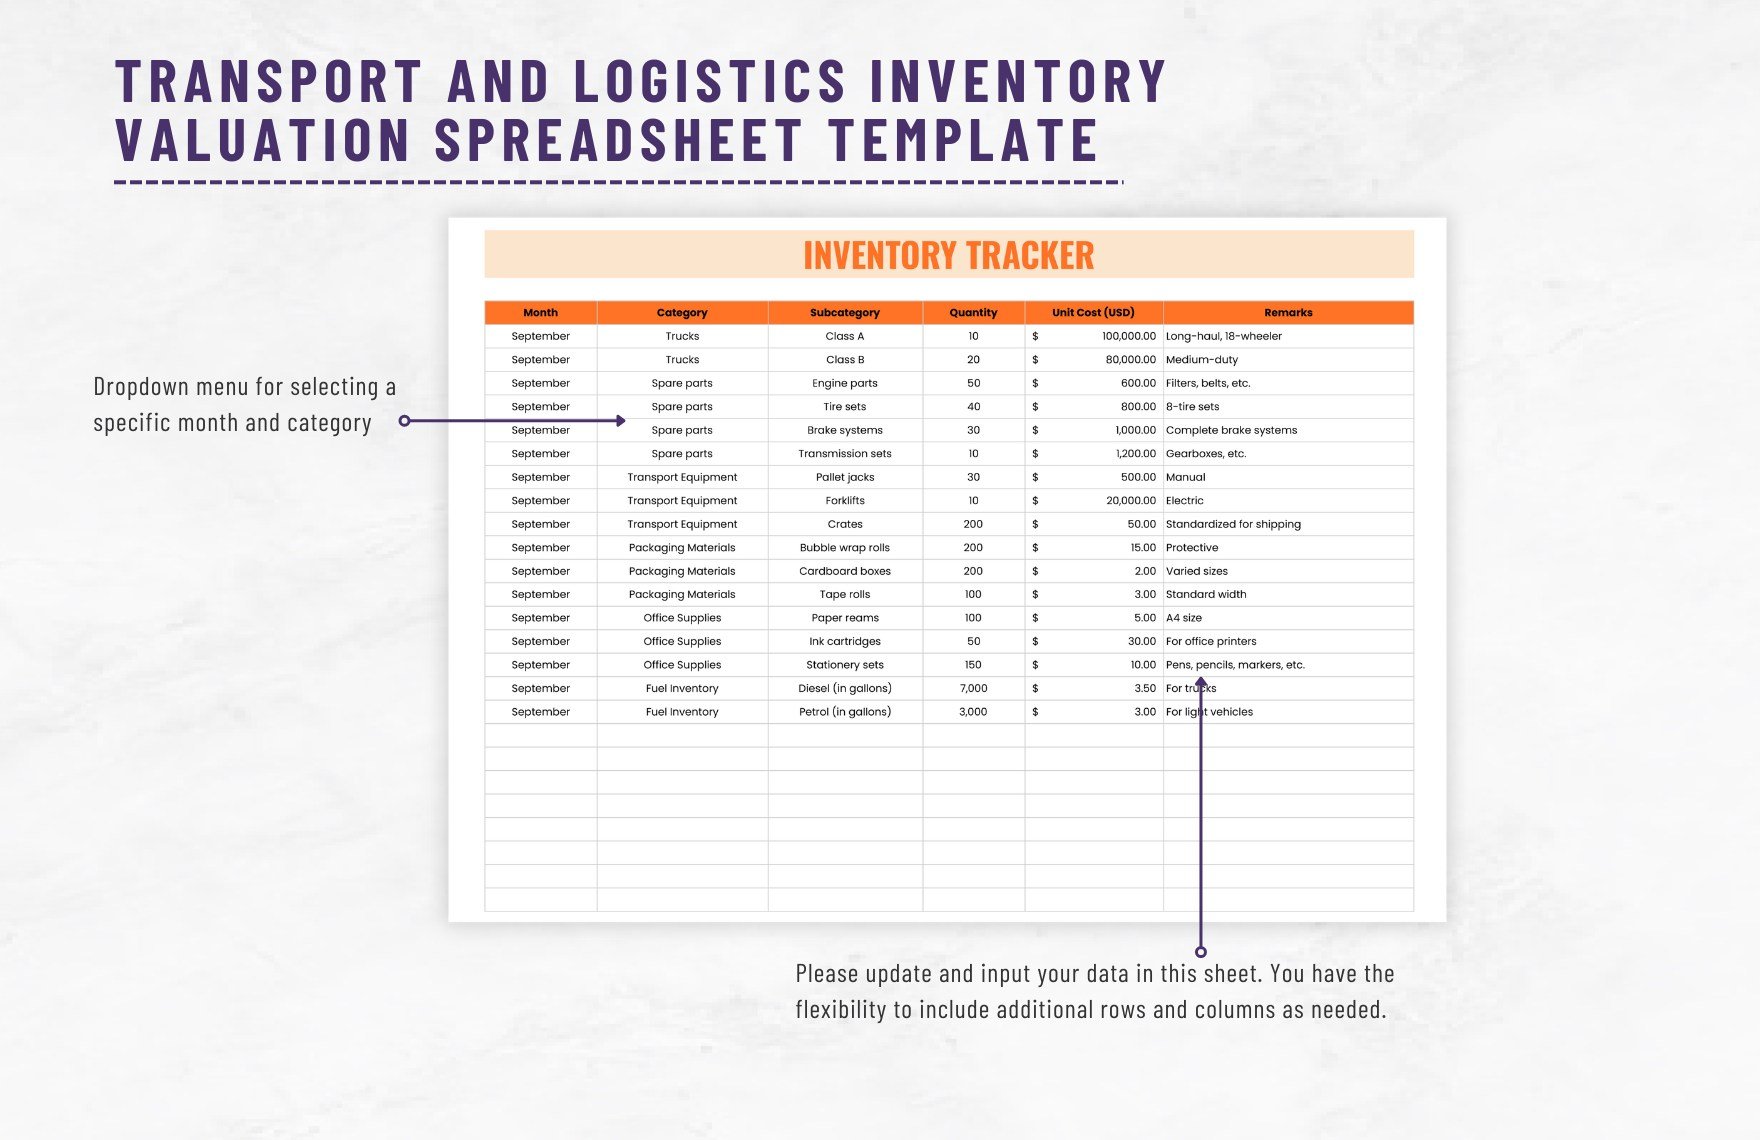 Transport and Logistics Inventory Valuation Spreadsheet Template